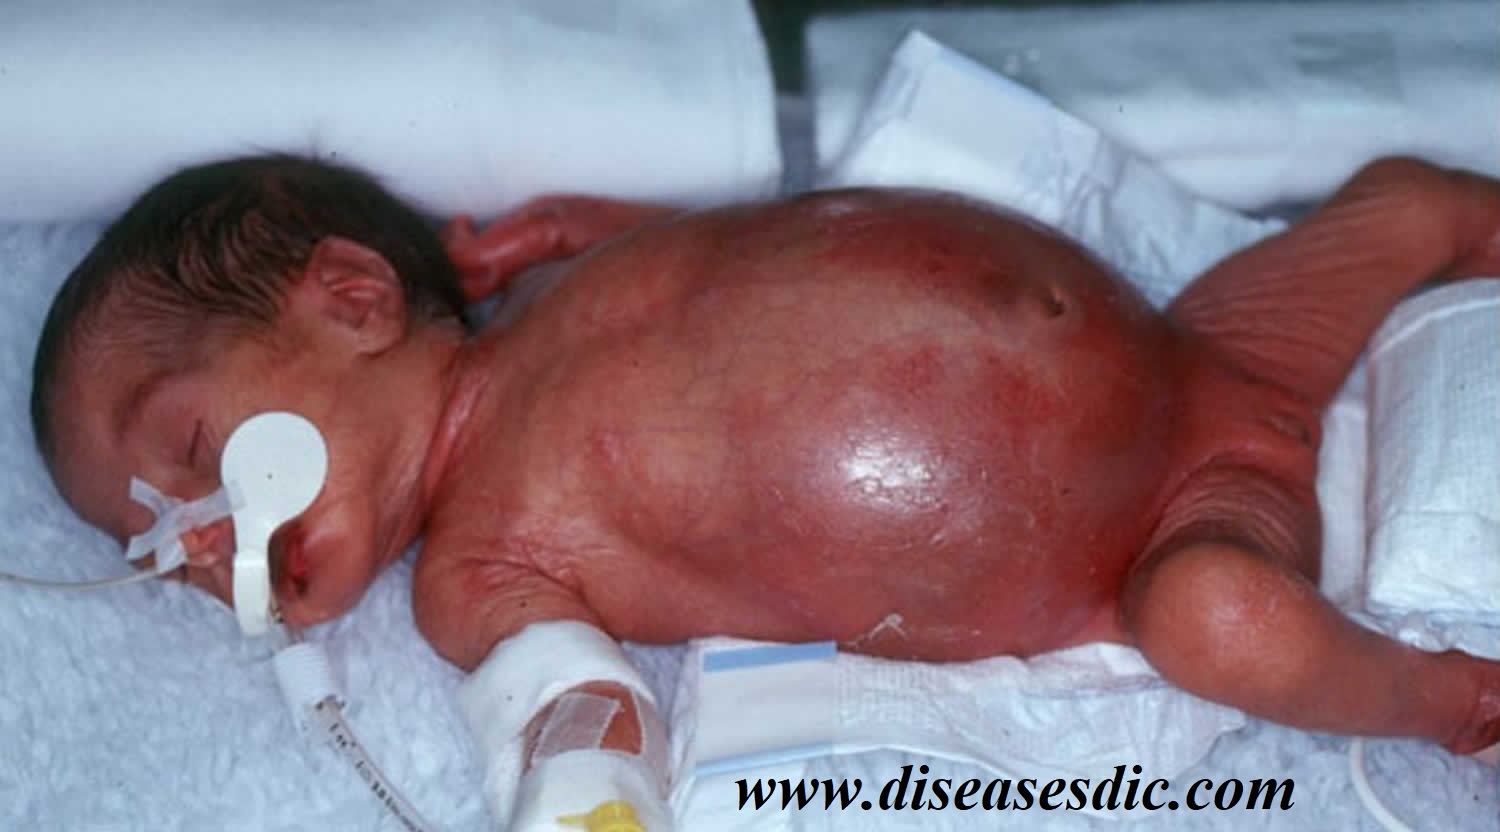 Why Would A 5 Day Old Baby Develop Necrotizing Enterocolitis?